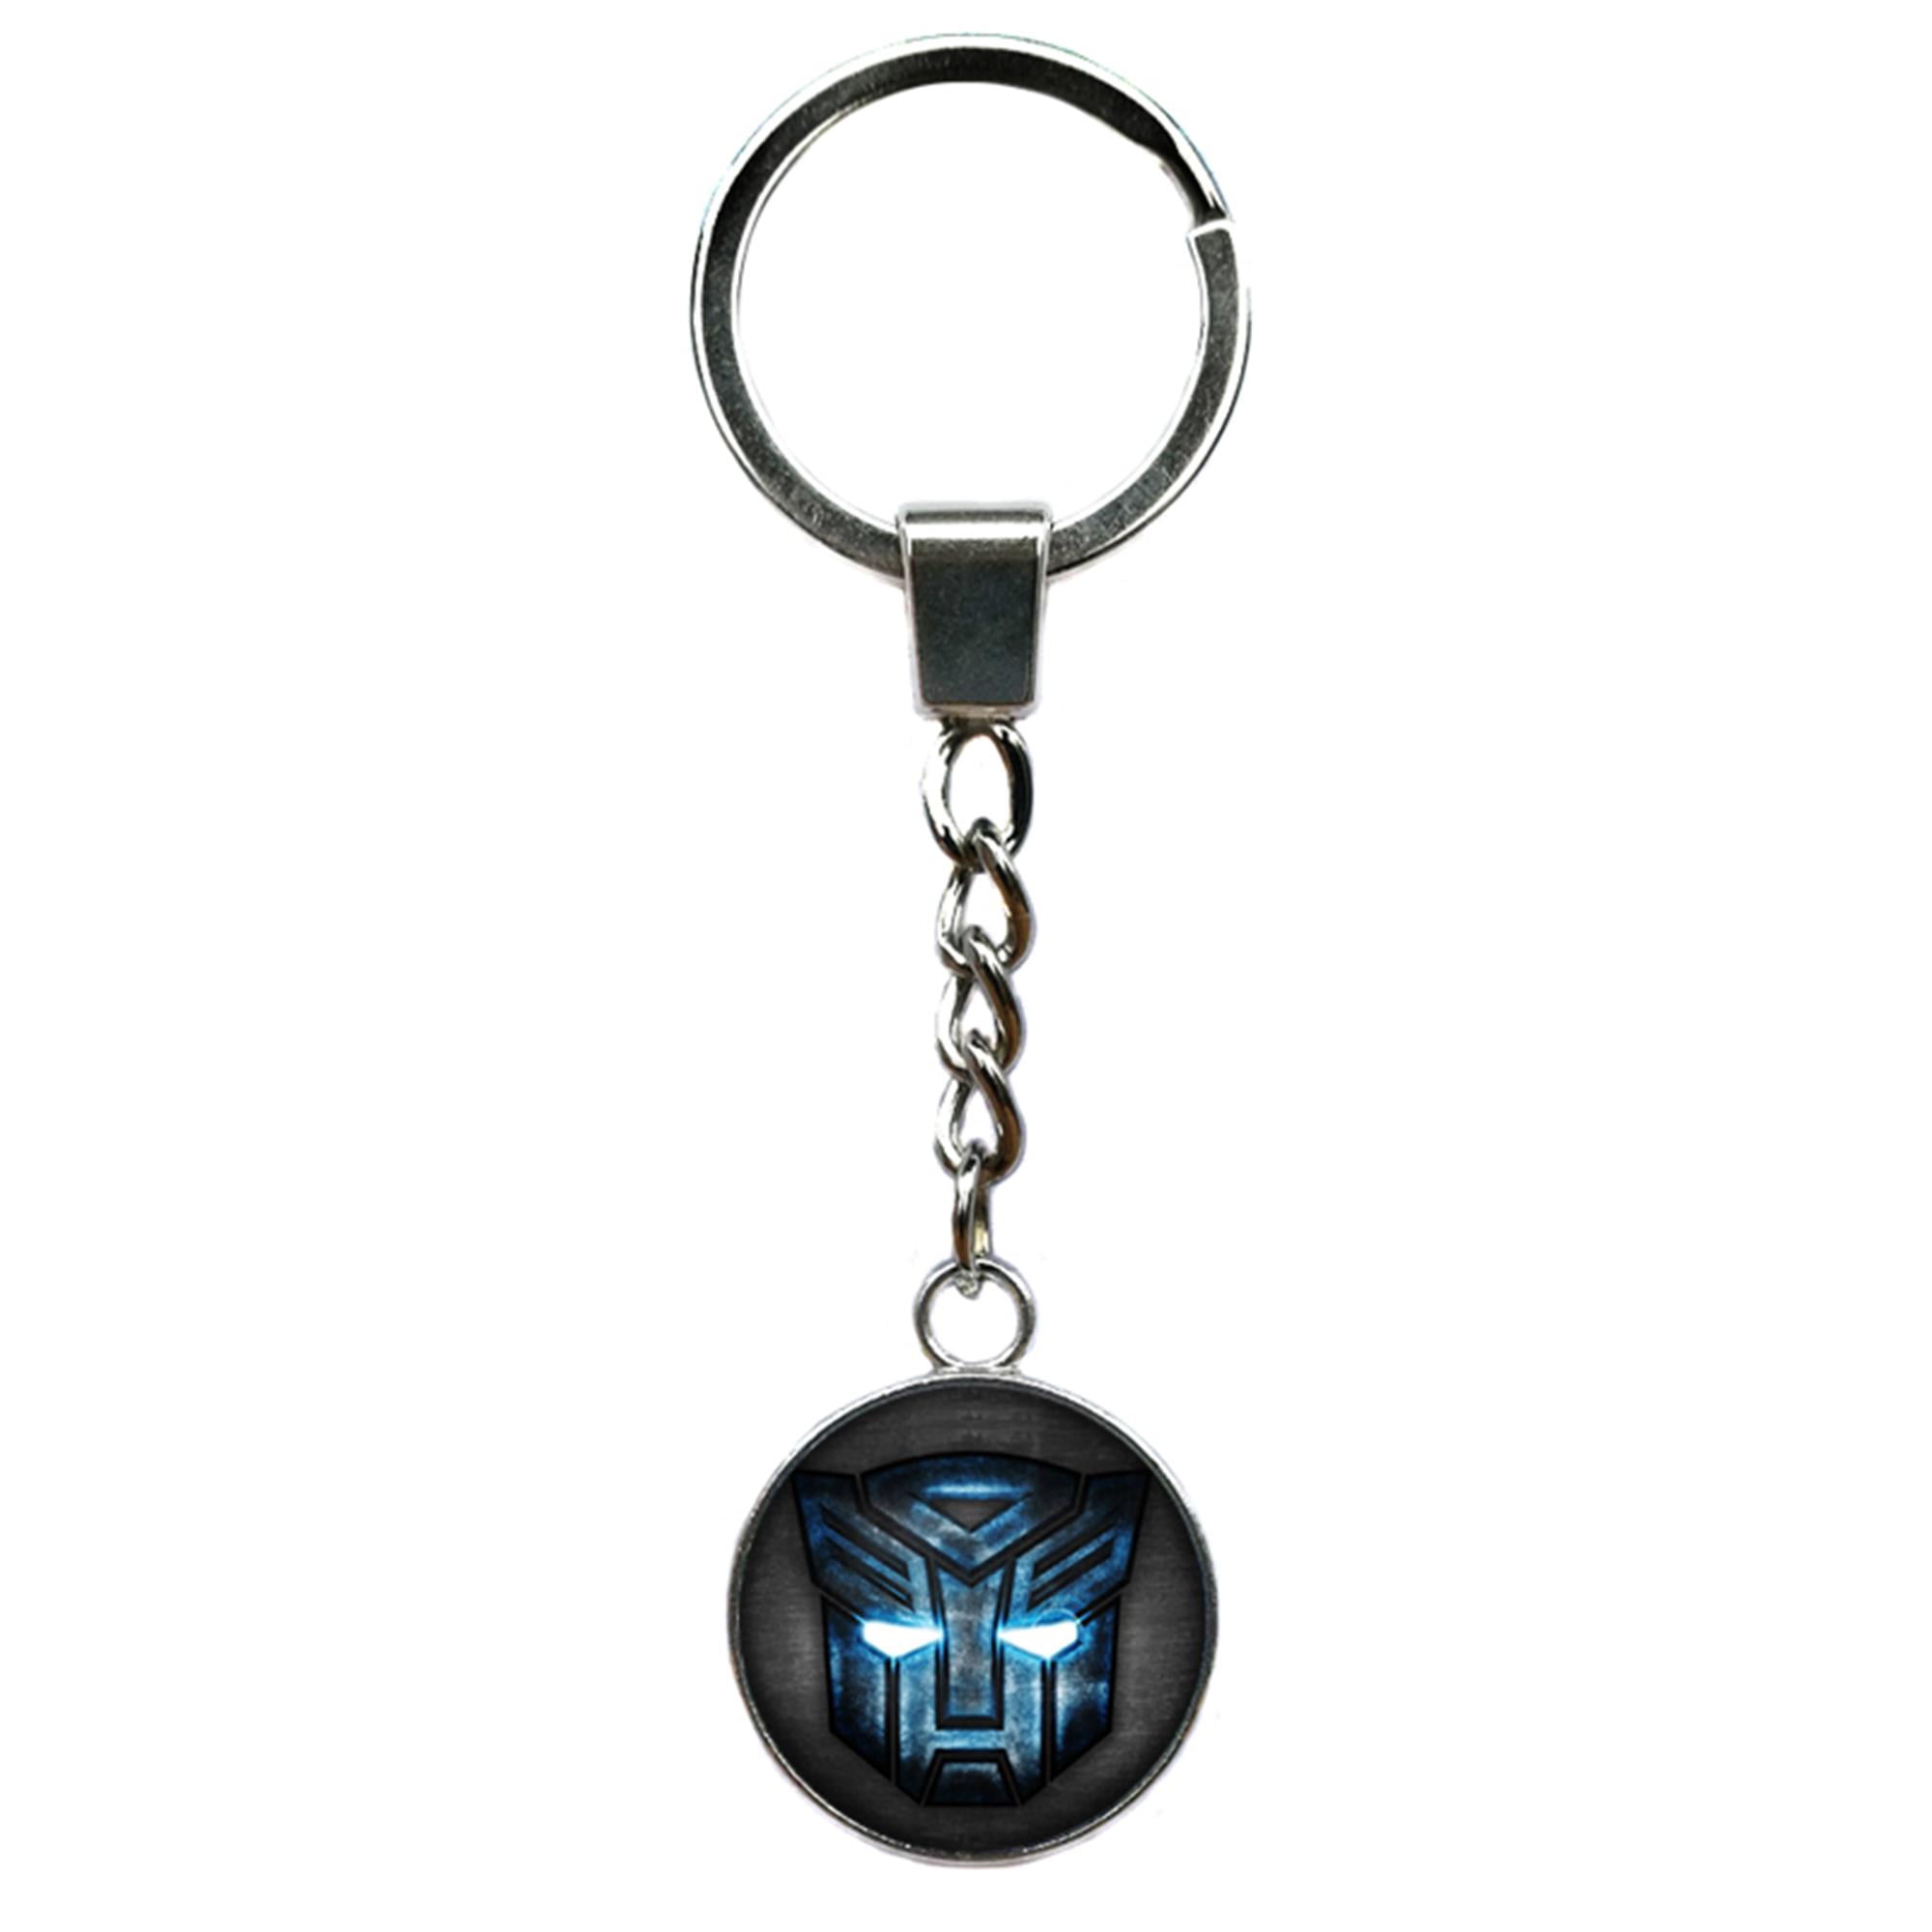 Transformers Autobots Decepticons Keychain or Necklace/Pendant 